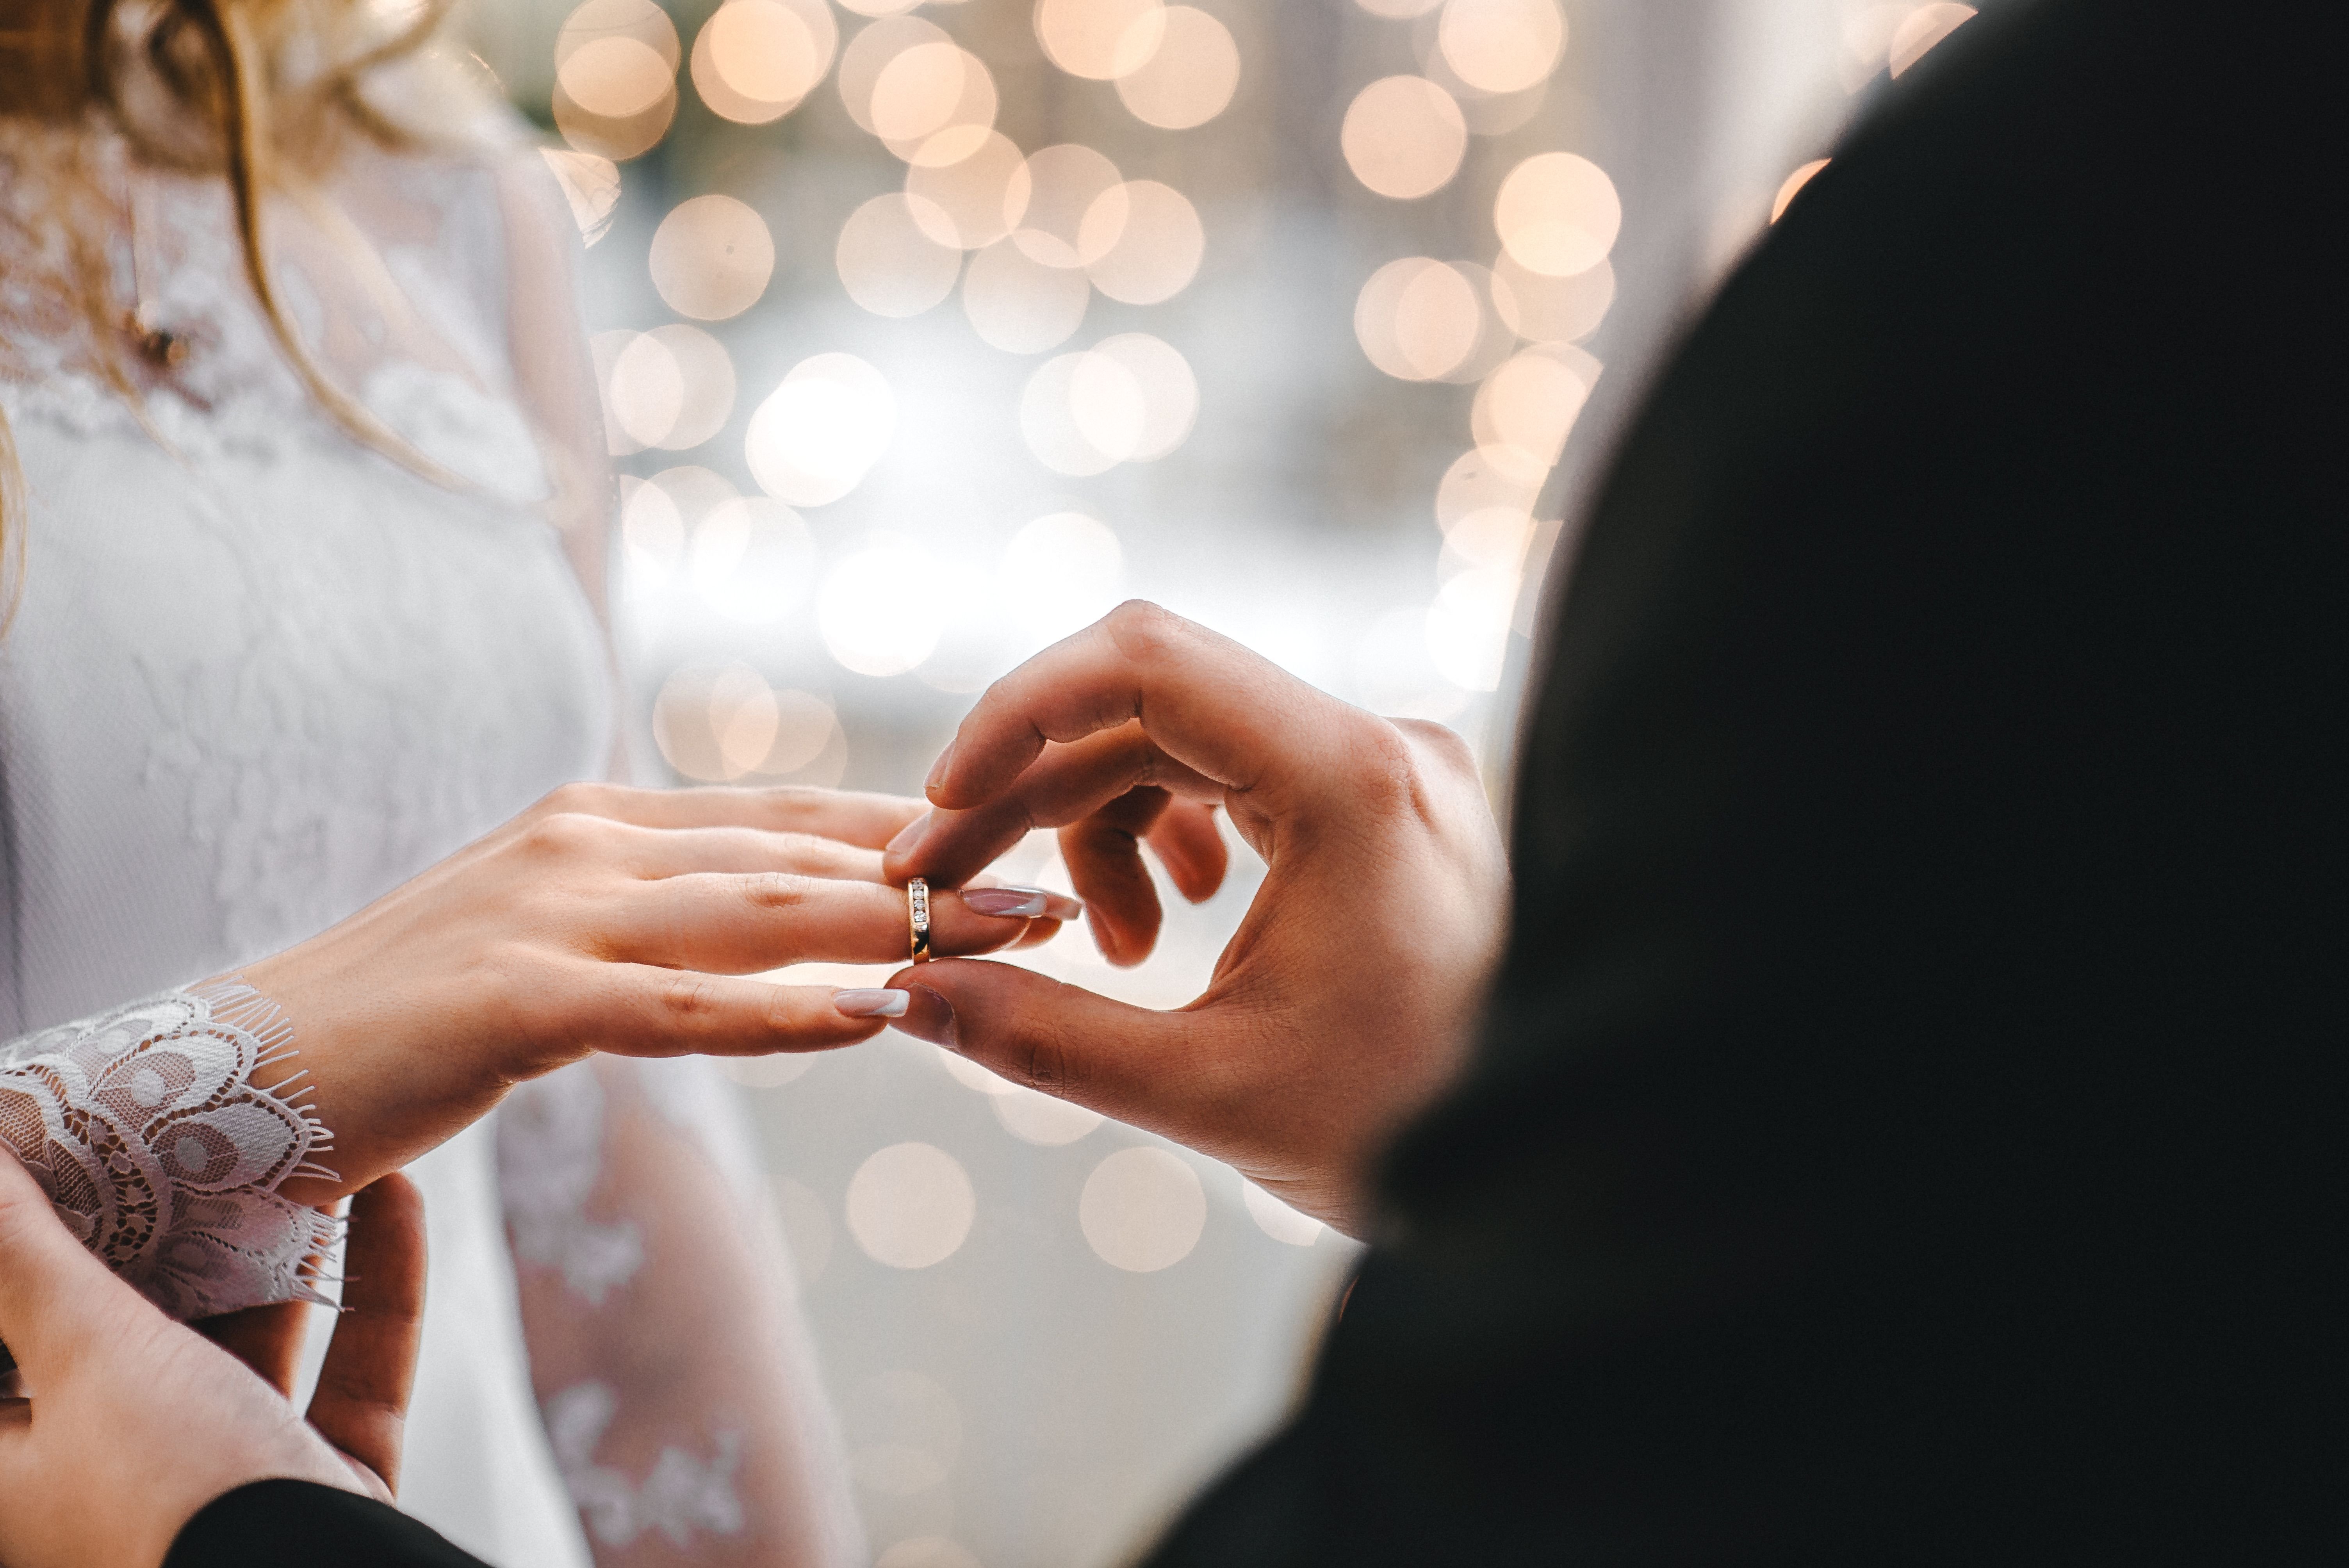 A couple at their wedding exchanging vows and rings | Photo: Pexels